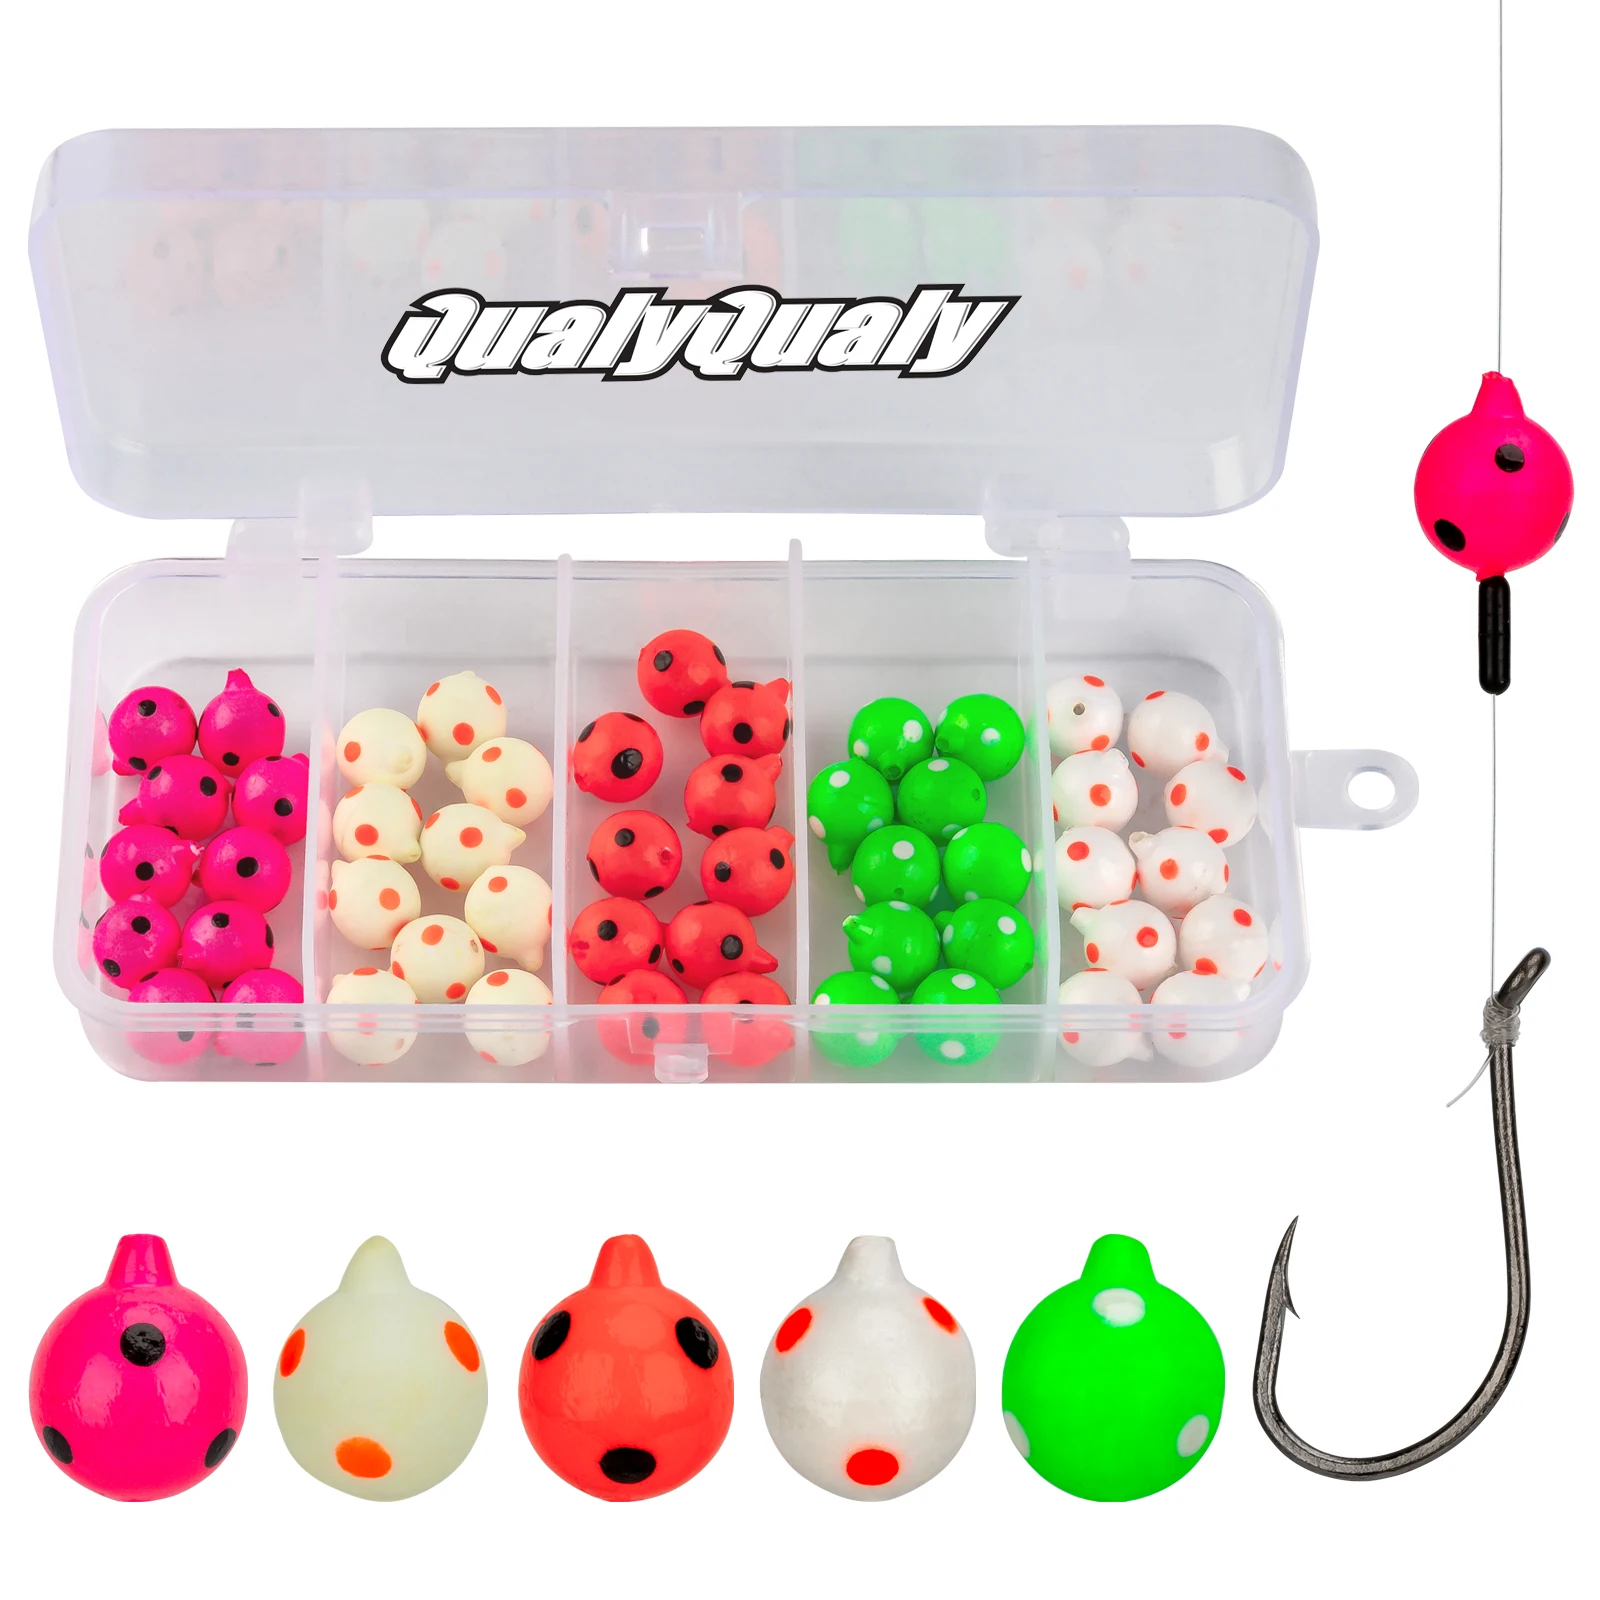 200/500pcs Glow in The Dark Beads Luminous Bait Eggs Kits Plastic Round Float Fishing Line Rig Beads 6/8mm Floating Salmon Trout Ball Stopper